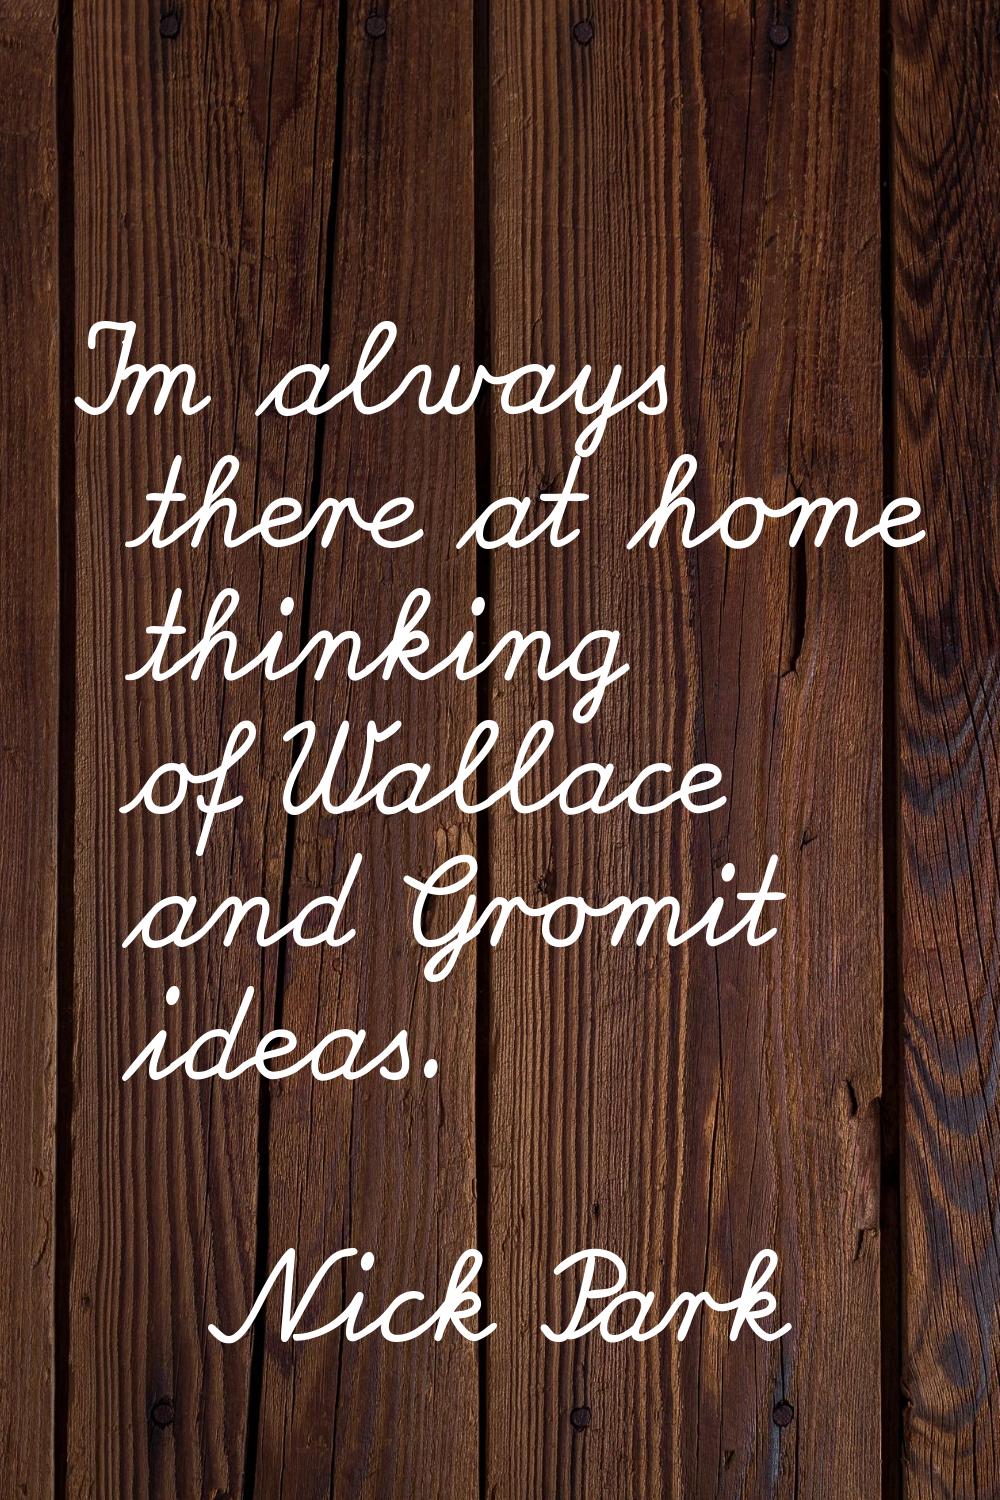 I'm always there at home thinking of Wallace and Gromit ideas.